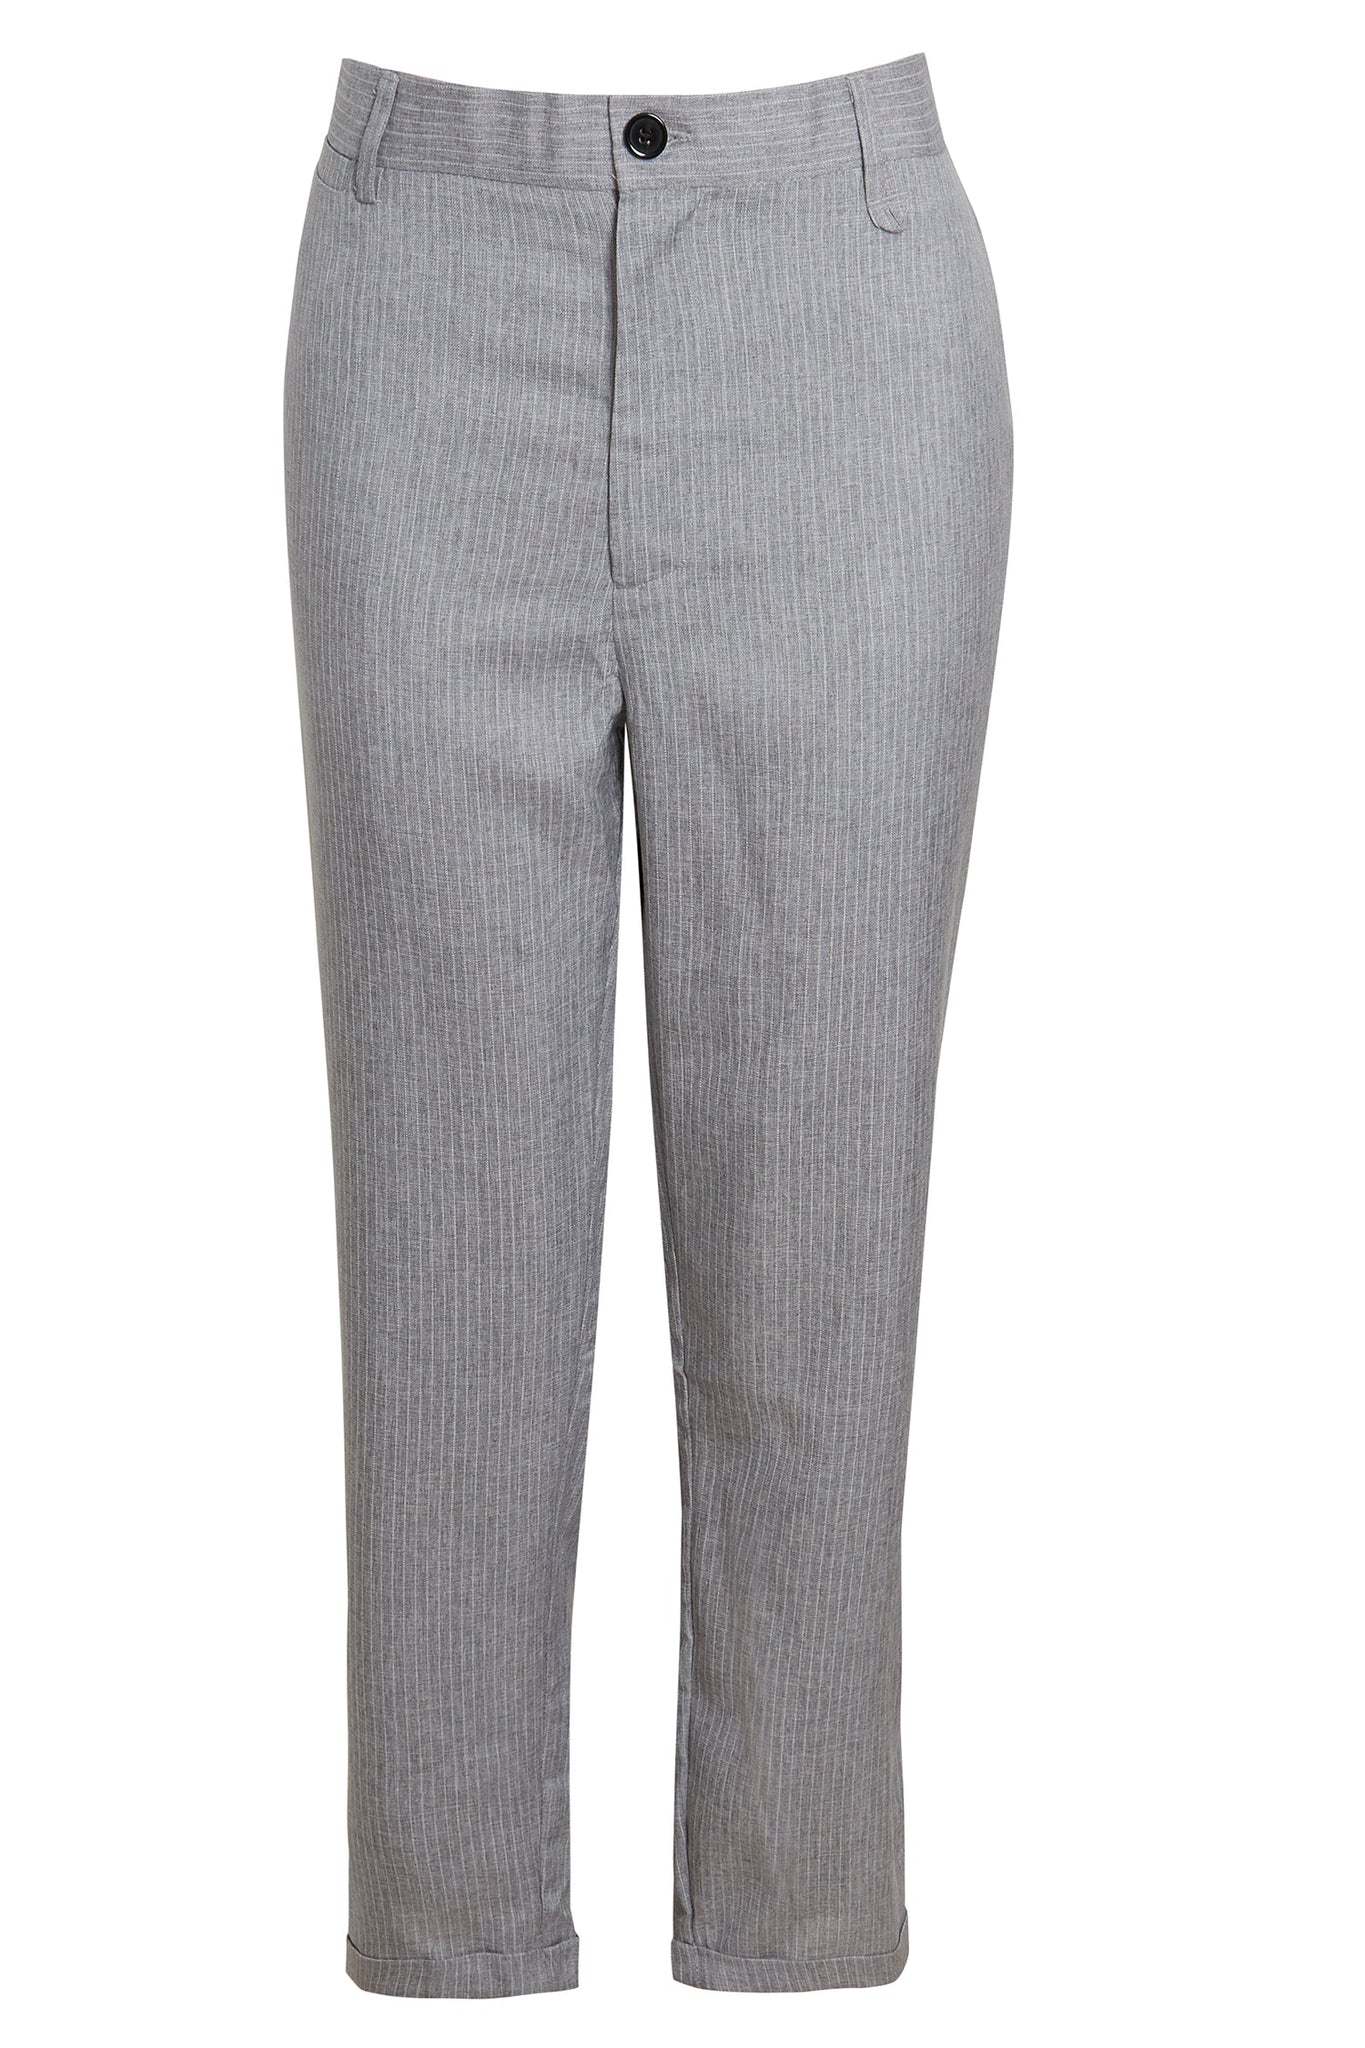 PIN STRIPE TURN-UP TAPERED TROUSER